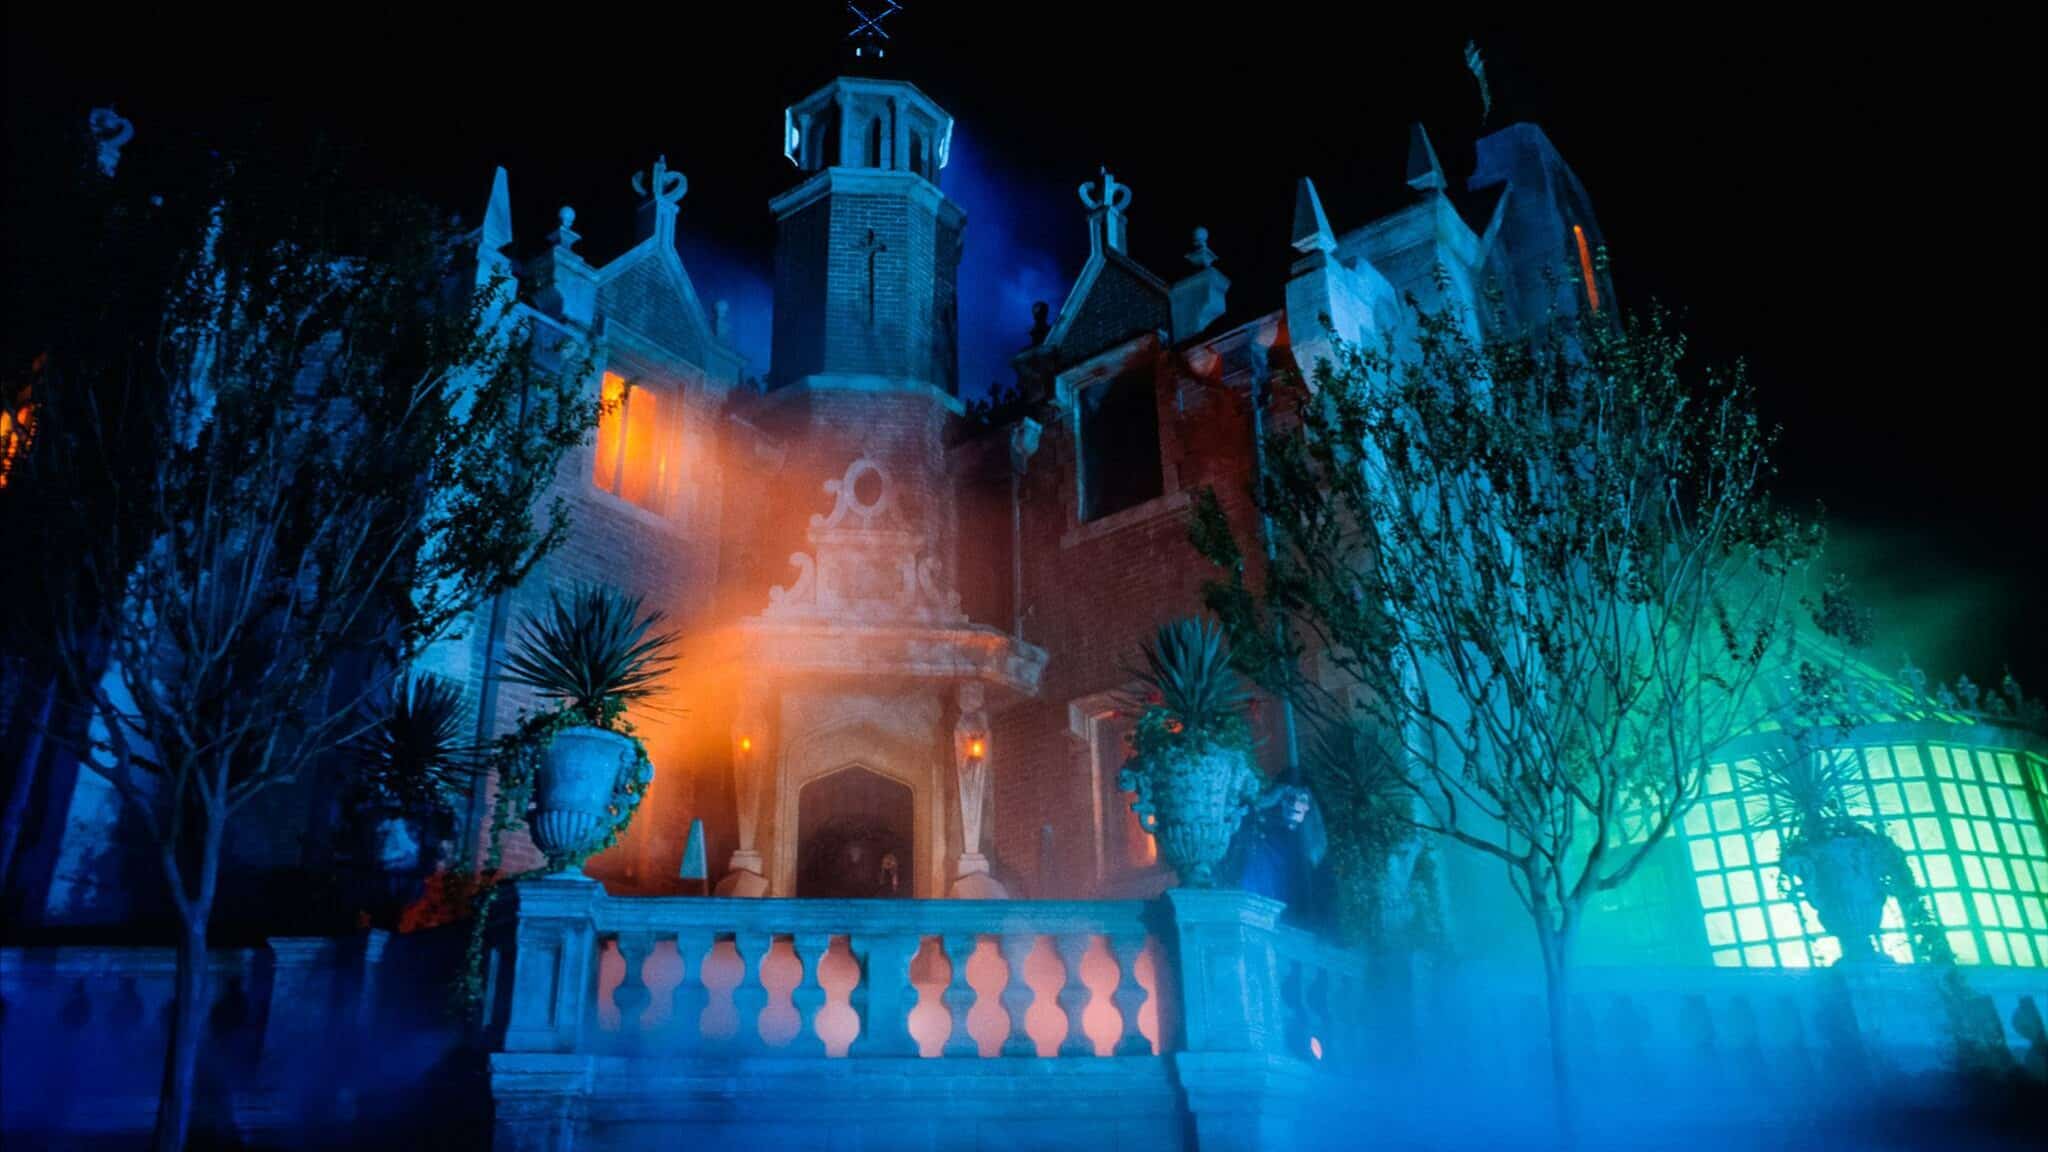 <p>Guests wind through an interactive cemetery, entering the mansion and boarding a “Doom Buggy.” Guests then spend the next 10 minutes or so receiving a guided tour through the Mansion, narrated by the infamous Ghost Host, witnessing numerous ghouls and happy haunts having a grand old time in the afterlife throughout the attraction's various scenes.</p> <p>The Haunted Mansion may be dark or intimidating for younger riders, but it remains a ceaselessly interesting ride that stands apart.</p> <p>Like the Tower of Terror, you know the minute you see that Gothic mansion standing alone in Liberty Square or hear the opening narration by the Ghost Host in the Stretching Room that you're in for a one-of-a-kind ride.</p>